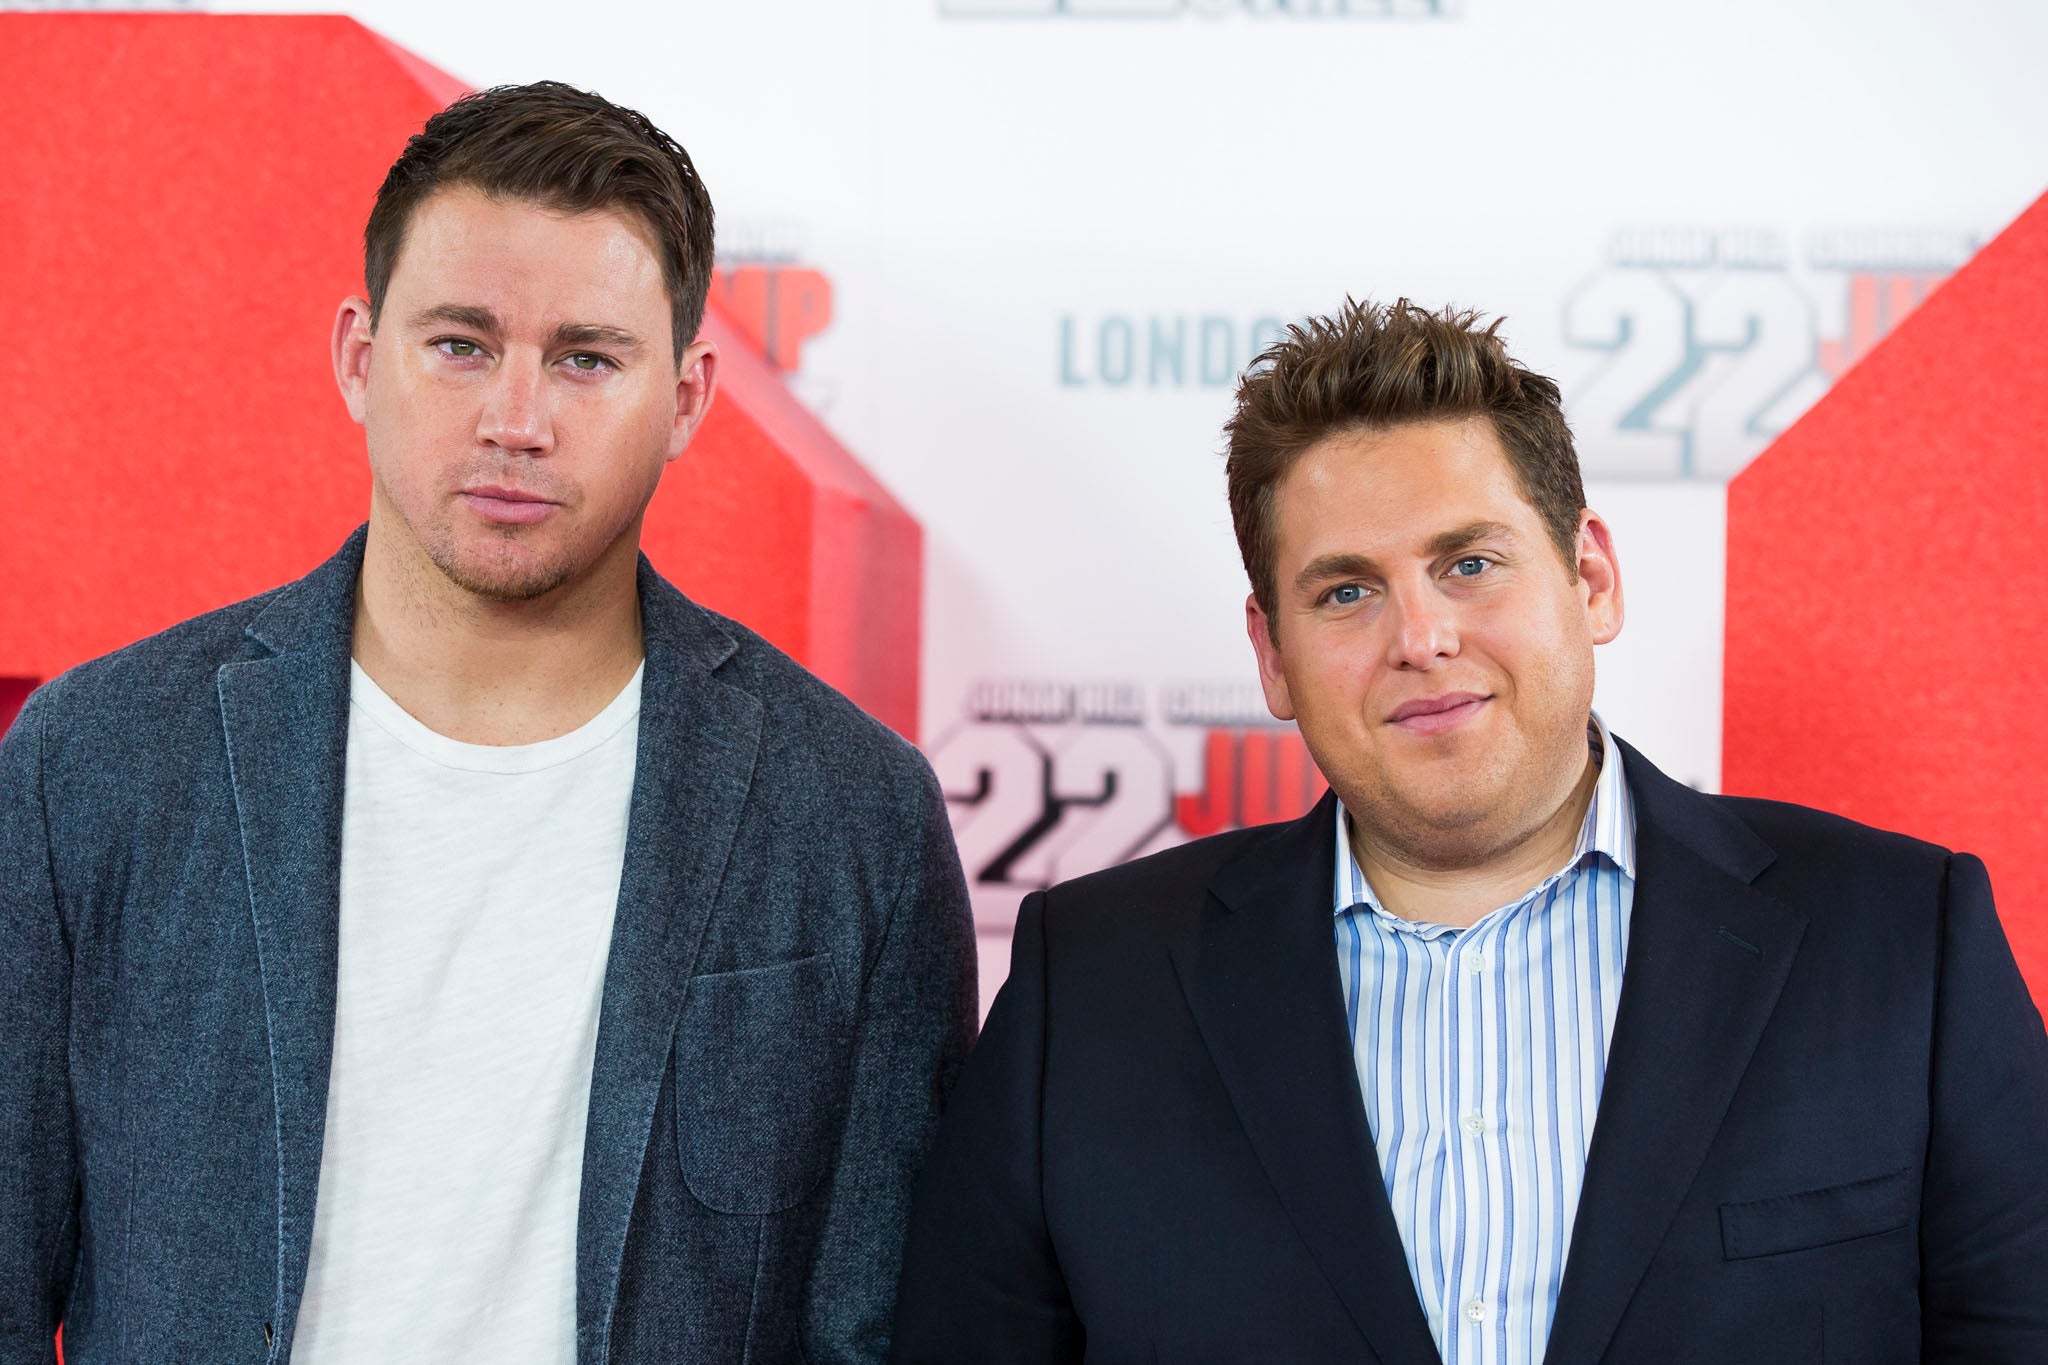 Jonah Hill (right) with his 22 Jump Street co-star Channing Tatum